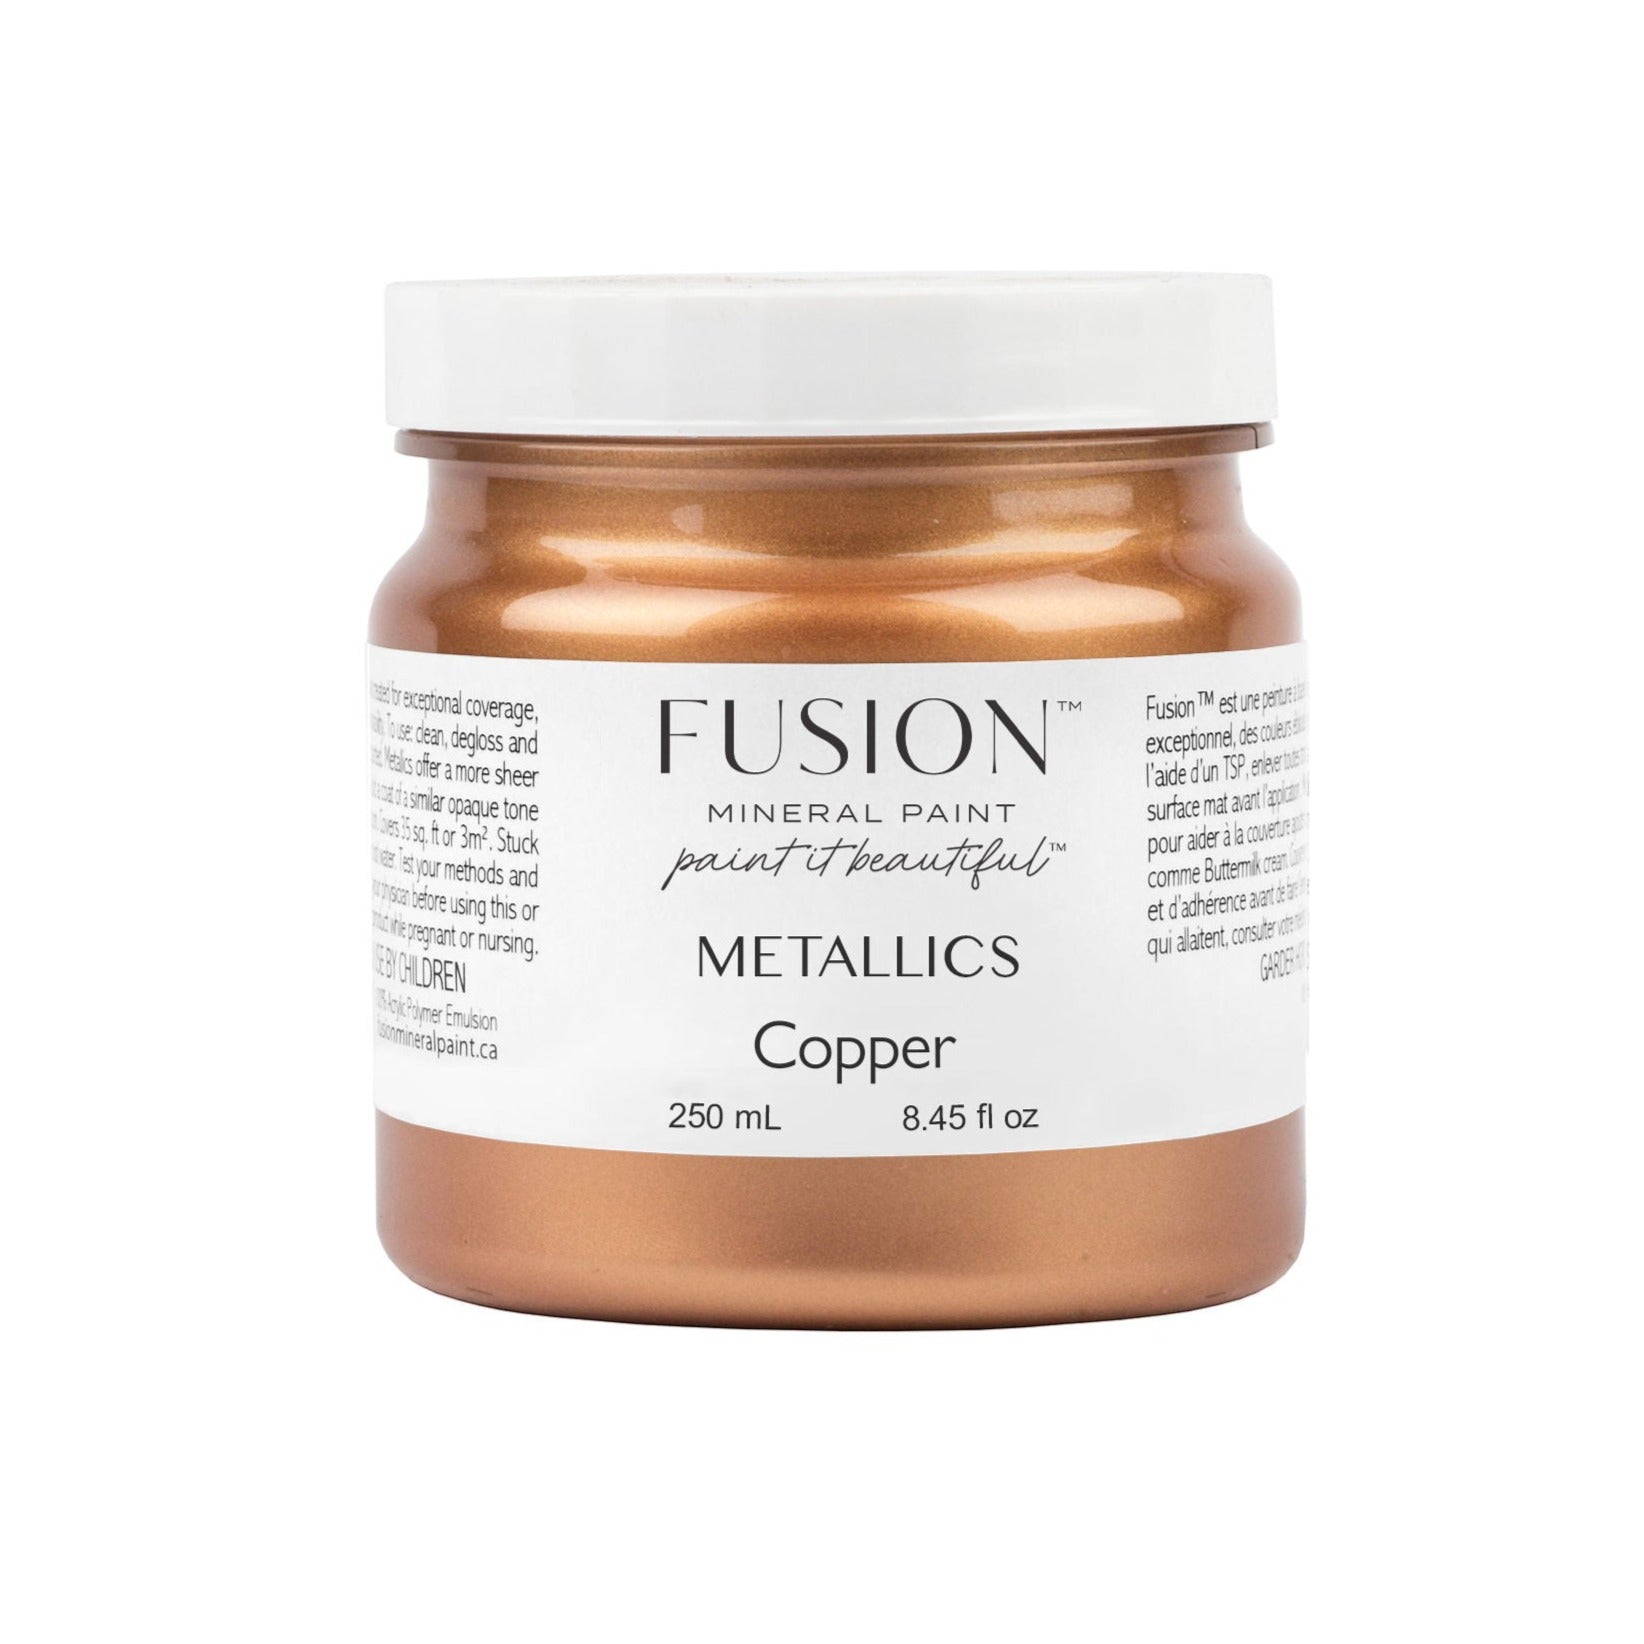 Fusion Mineral Paint - Metallic - Copper - Rustic River Home